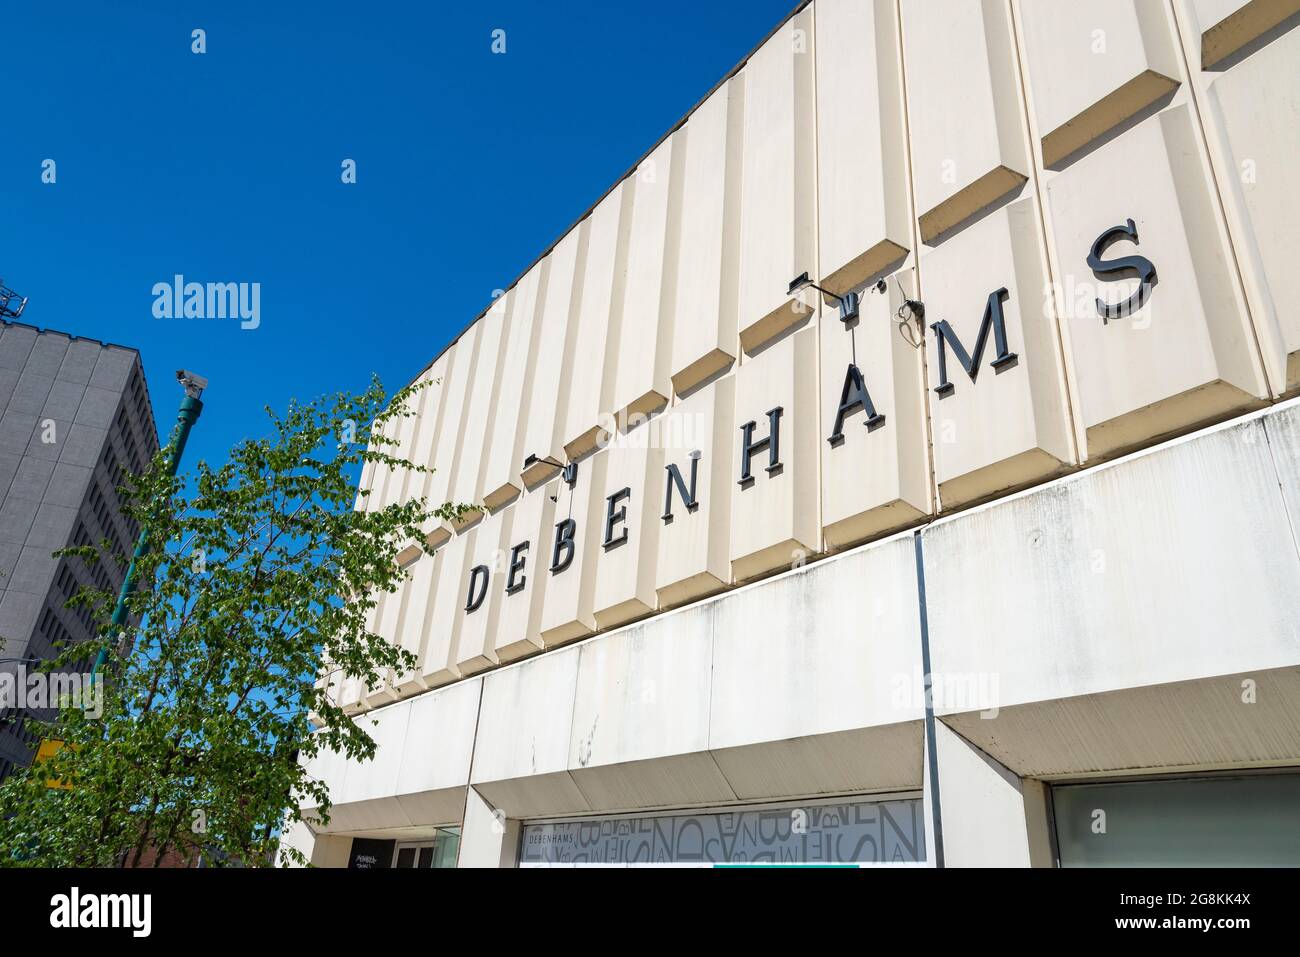 Exterior of the now closed Debenhams department store in Stockport, Greater Manchester. Once a landmark in the town it closed in 2021. Stock Photo